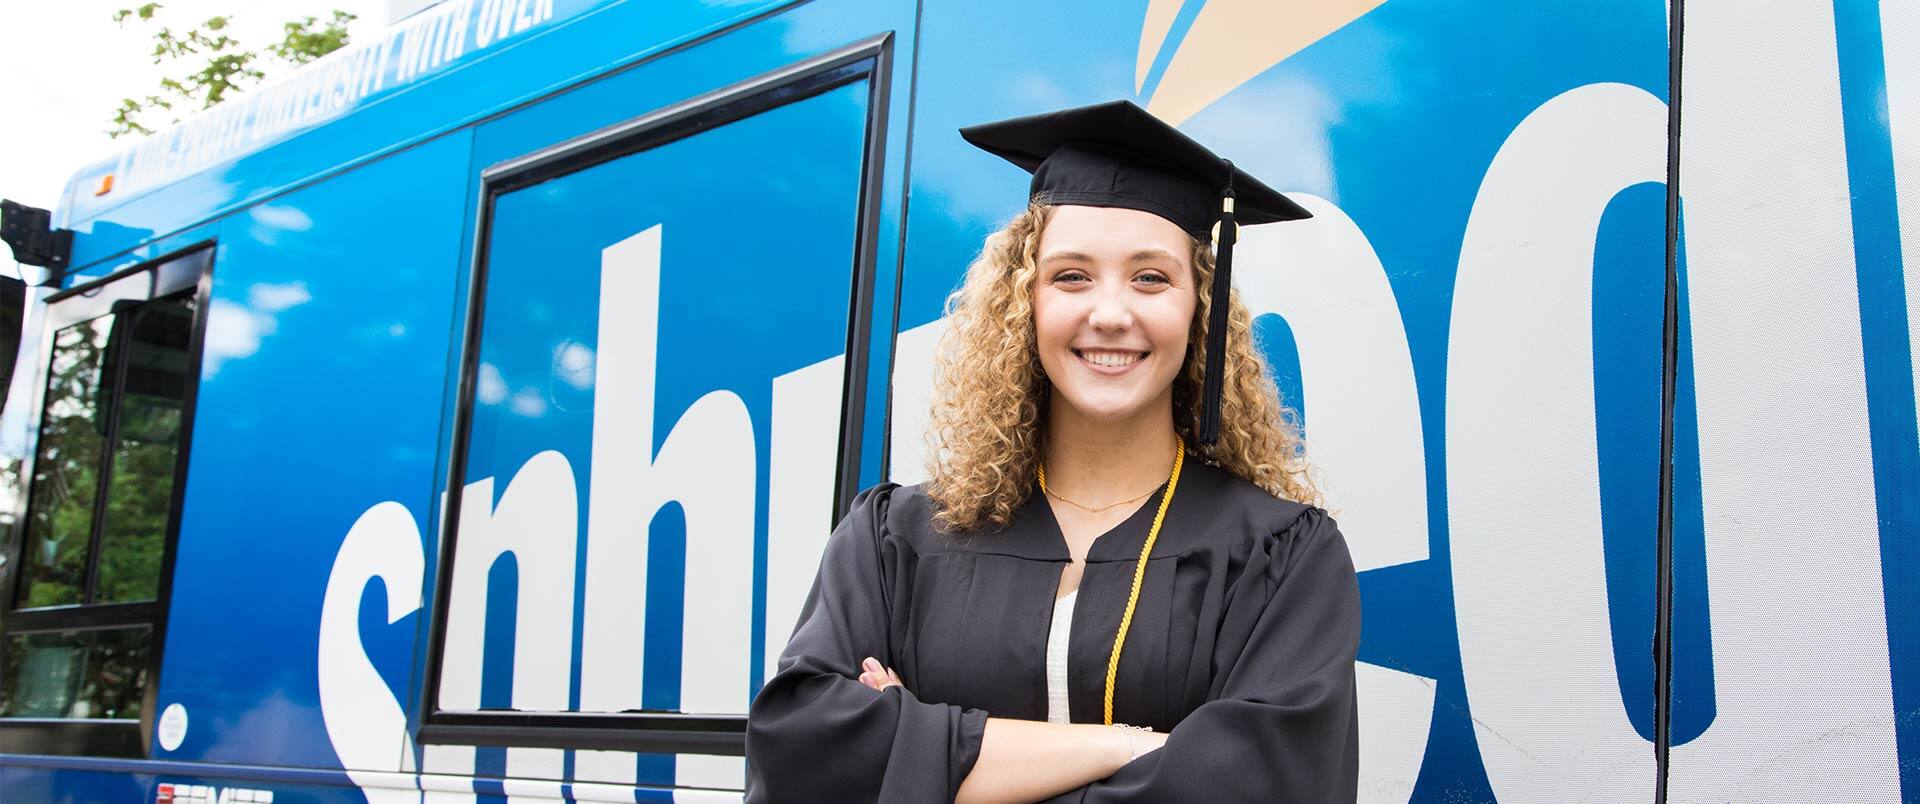 Joann Coffey, who earned her degree from SNHU, wearing her cap and gown and standing in front of the SNHU-branded bus.